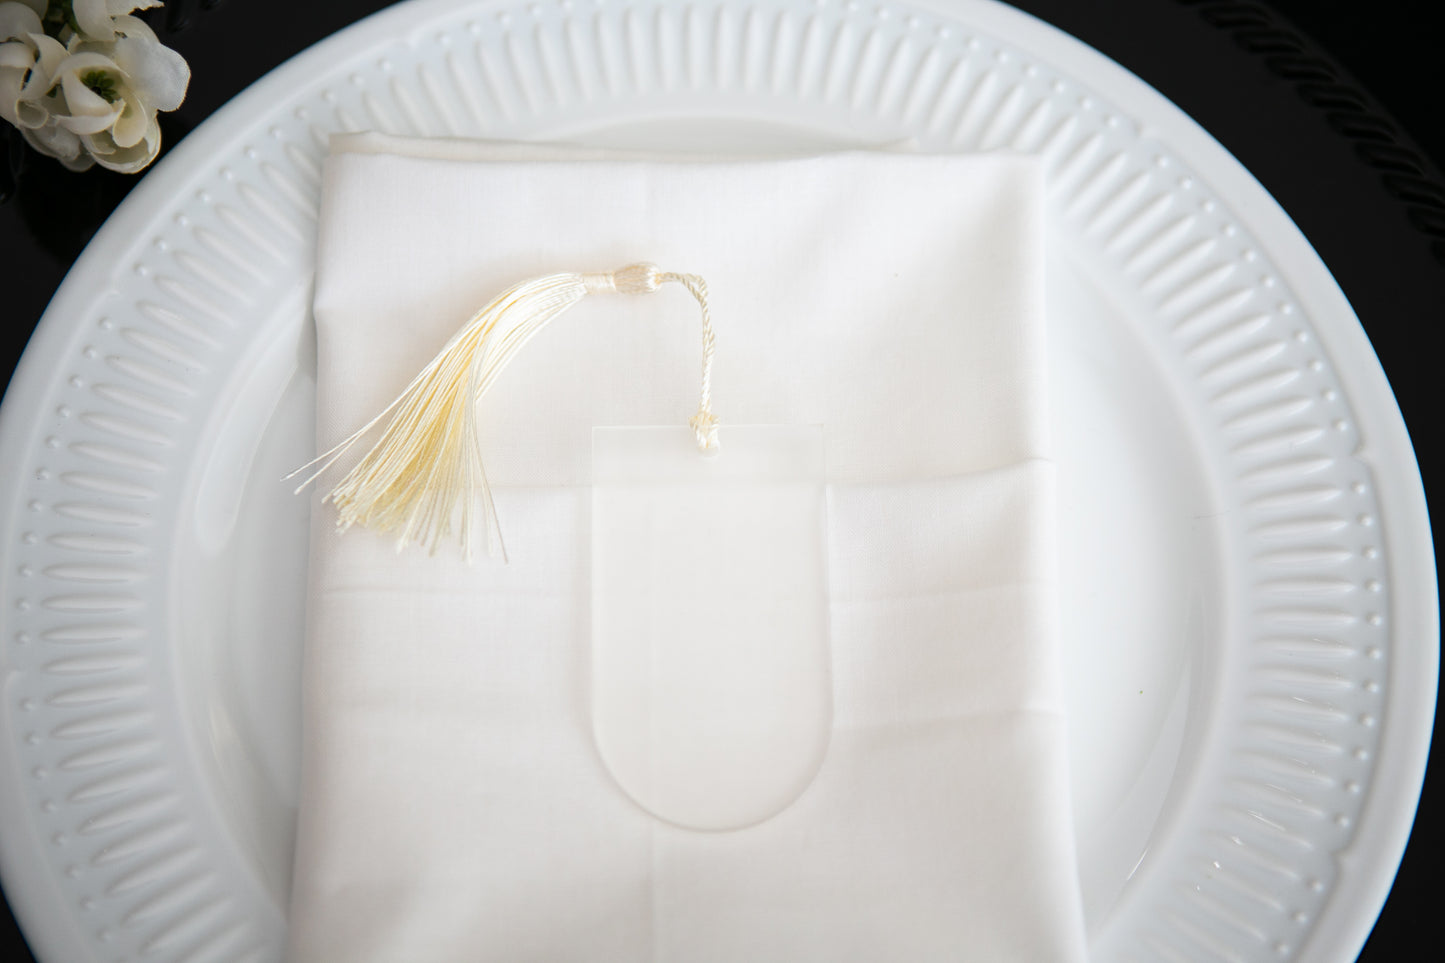 Luxury Wedding Place Cards with Tassels